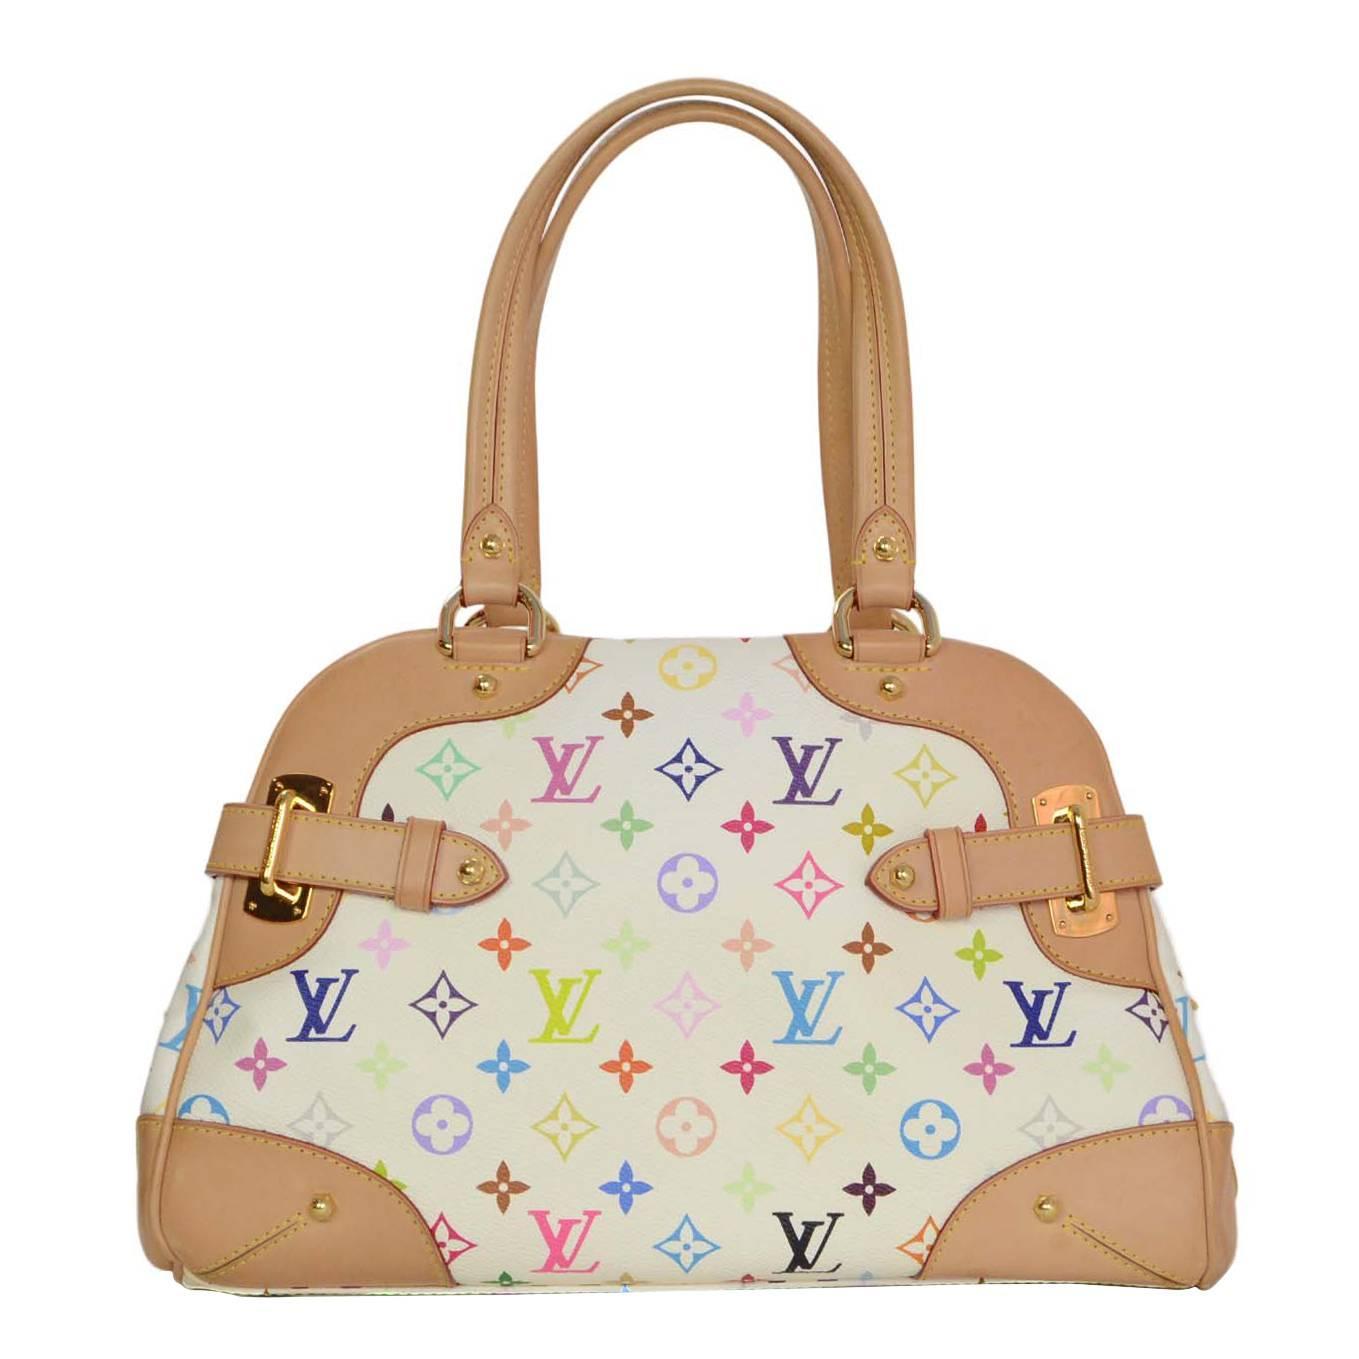 Louis Vuitton Multi-Colored Monogram Claudia Tote Bag GHWRT. $2,270 For Sale at 1stdibs